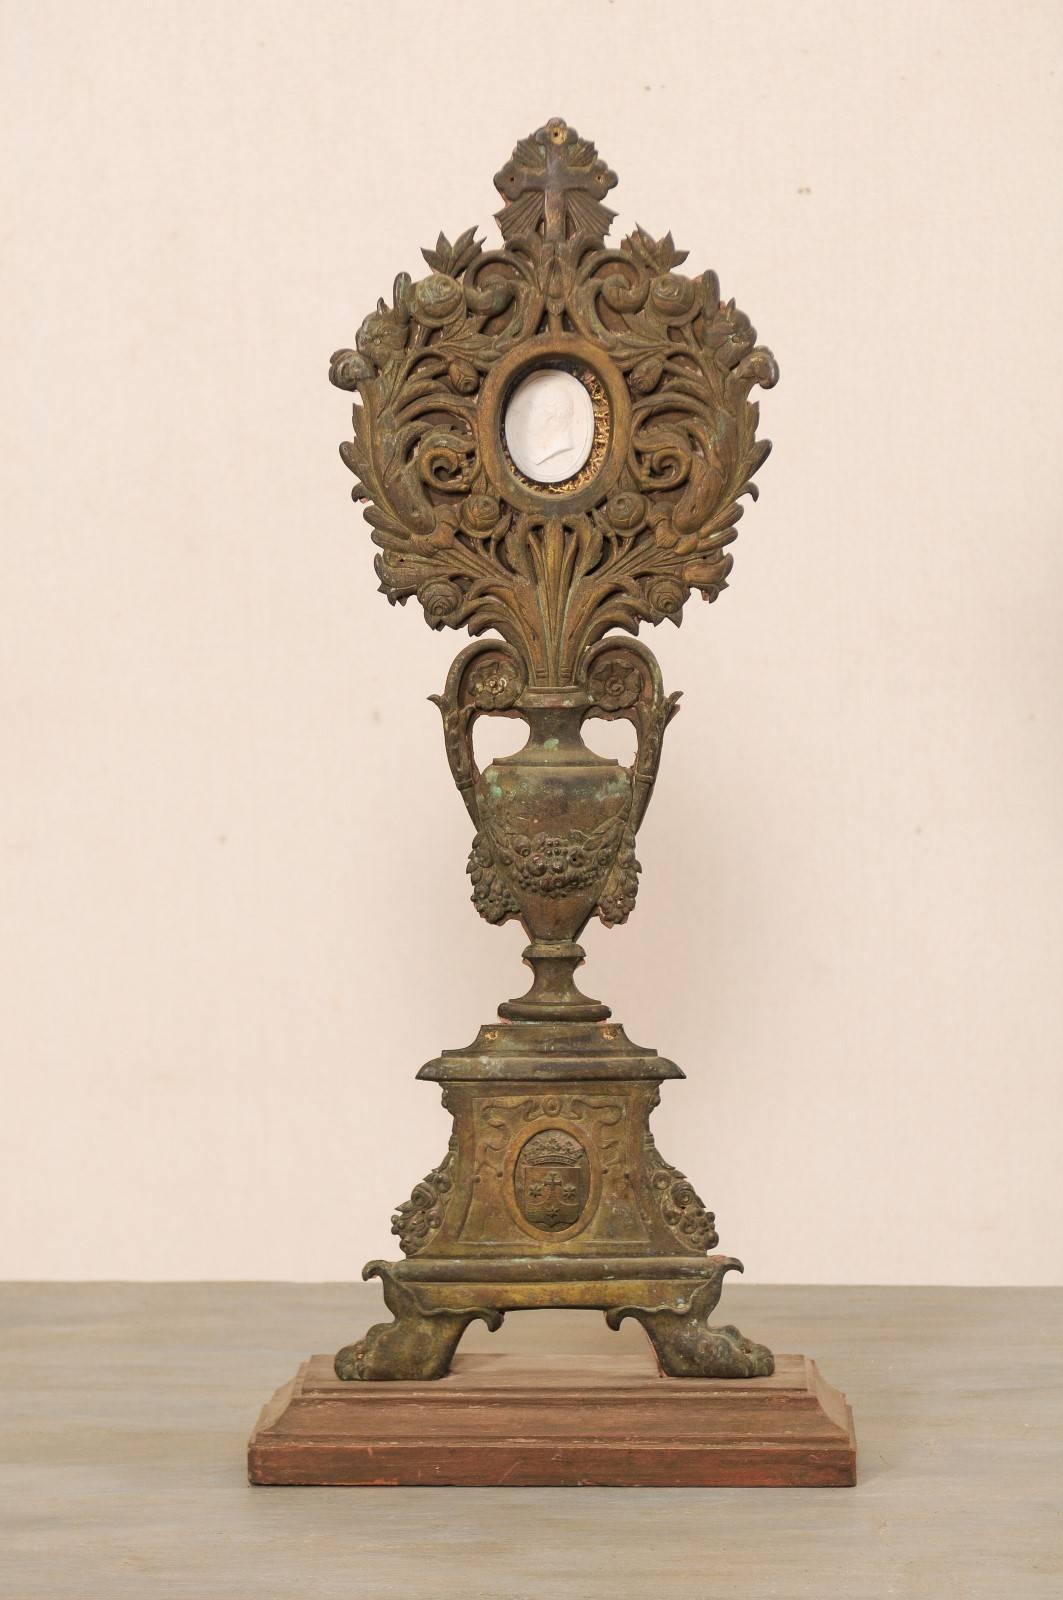 A French 19th century altarpiece with intaglio. This antique French altarpiece features an urn and floral motif, with a single intaglio set into the central top bouquet. This altarpiece, with its nicely decorated repoussé (a technique in which the